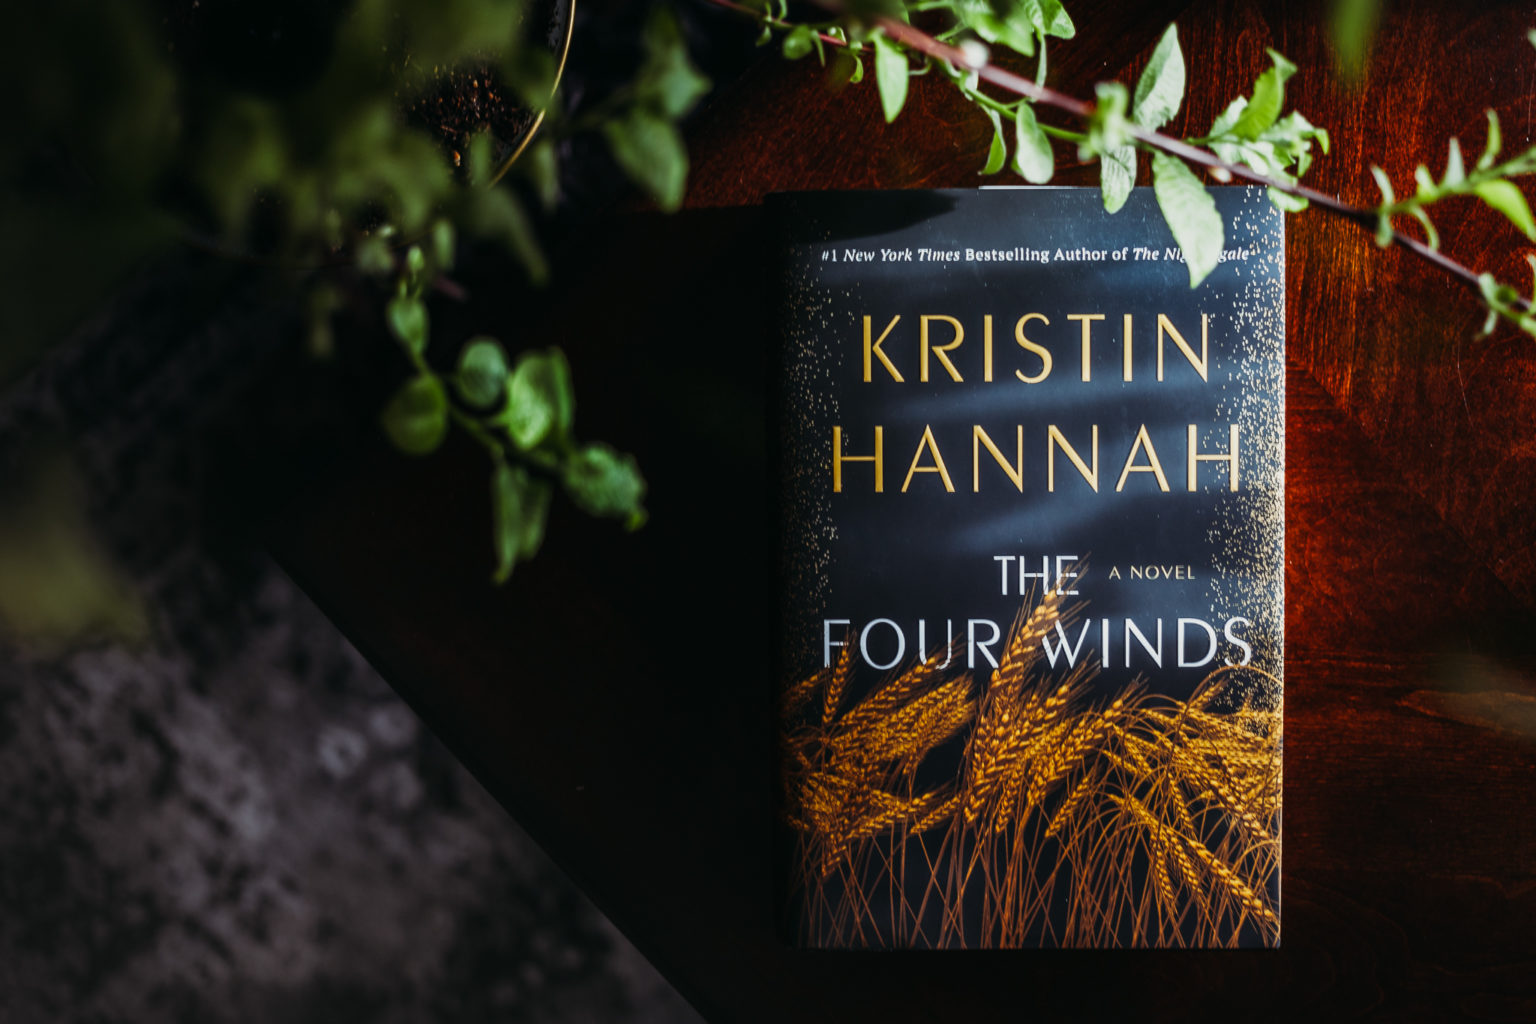 book review for the four winds by kristin hannah